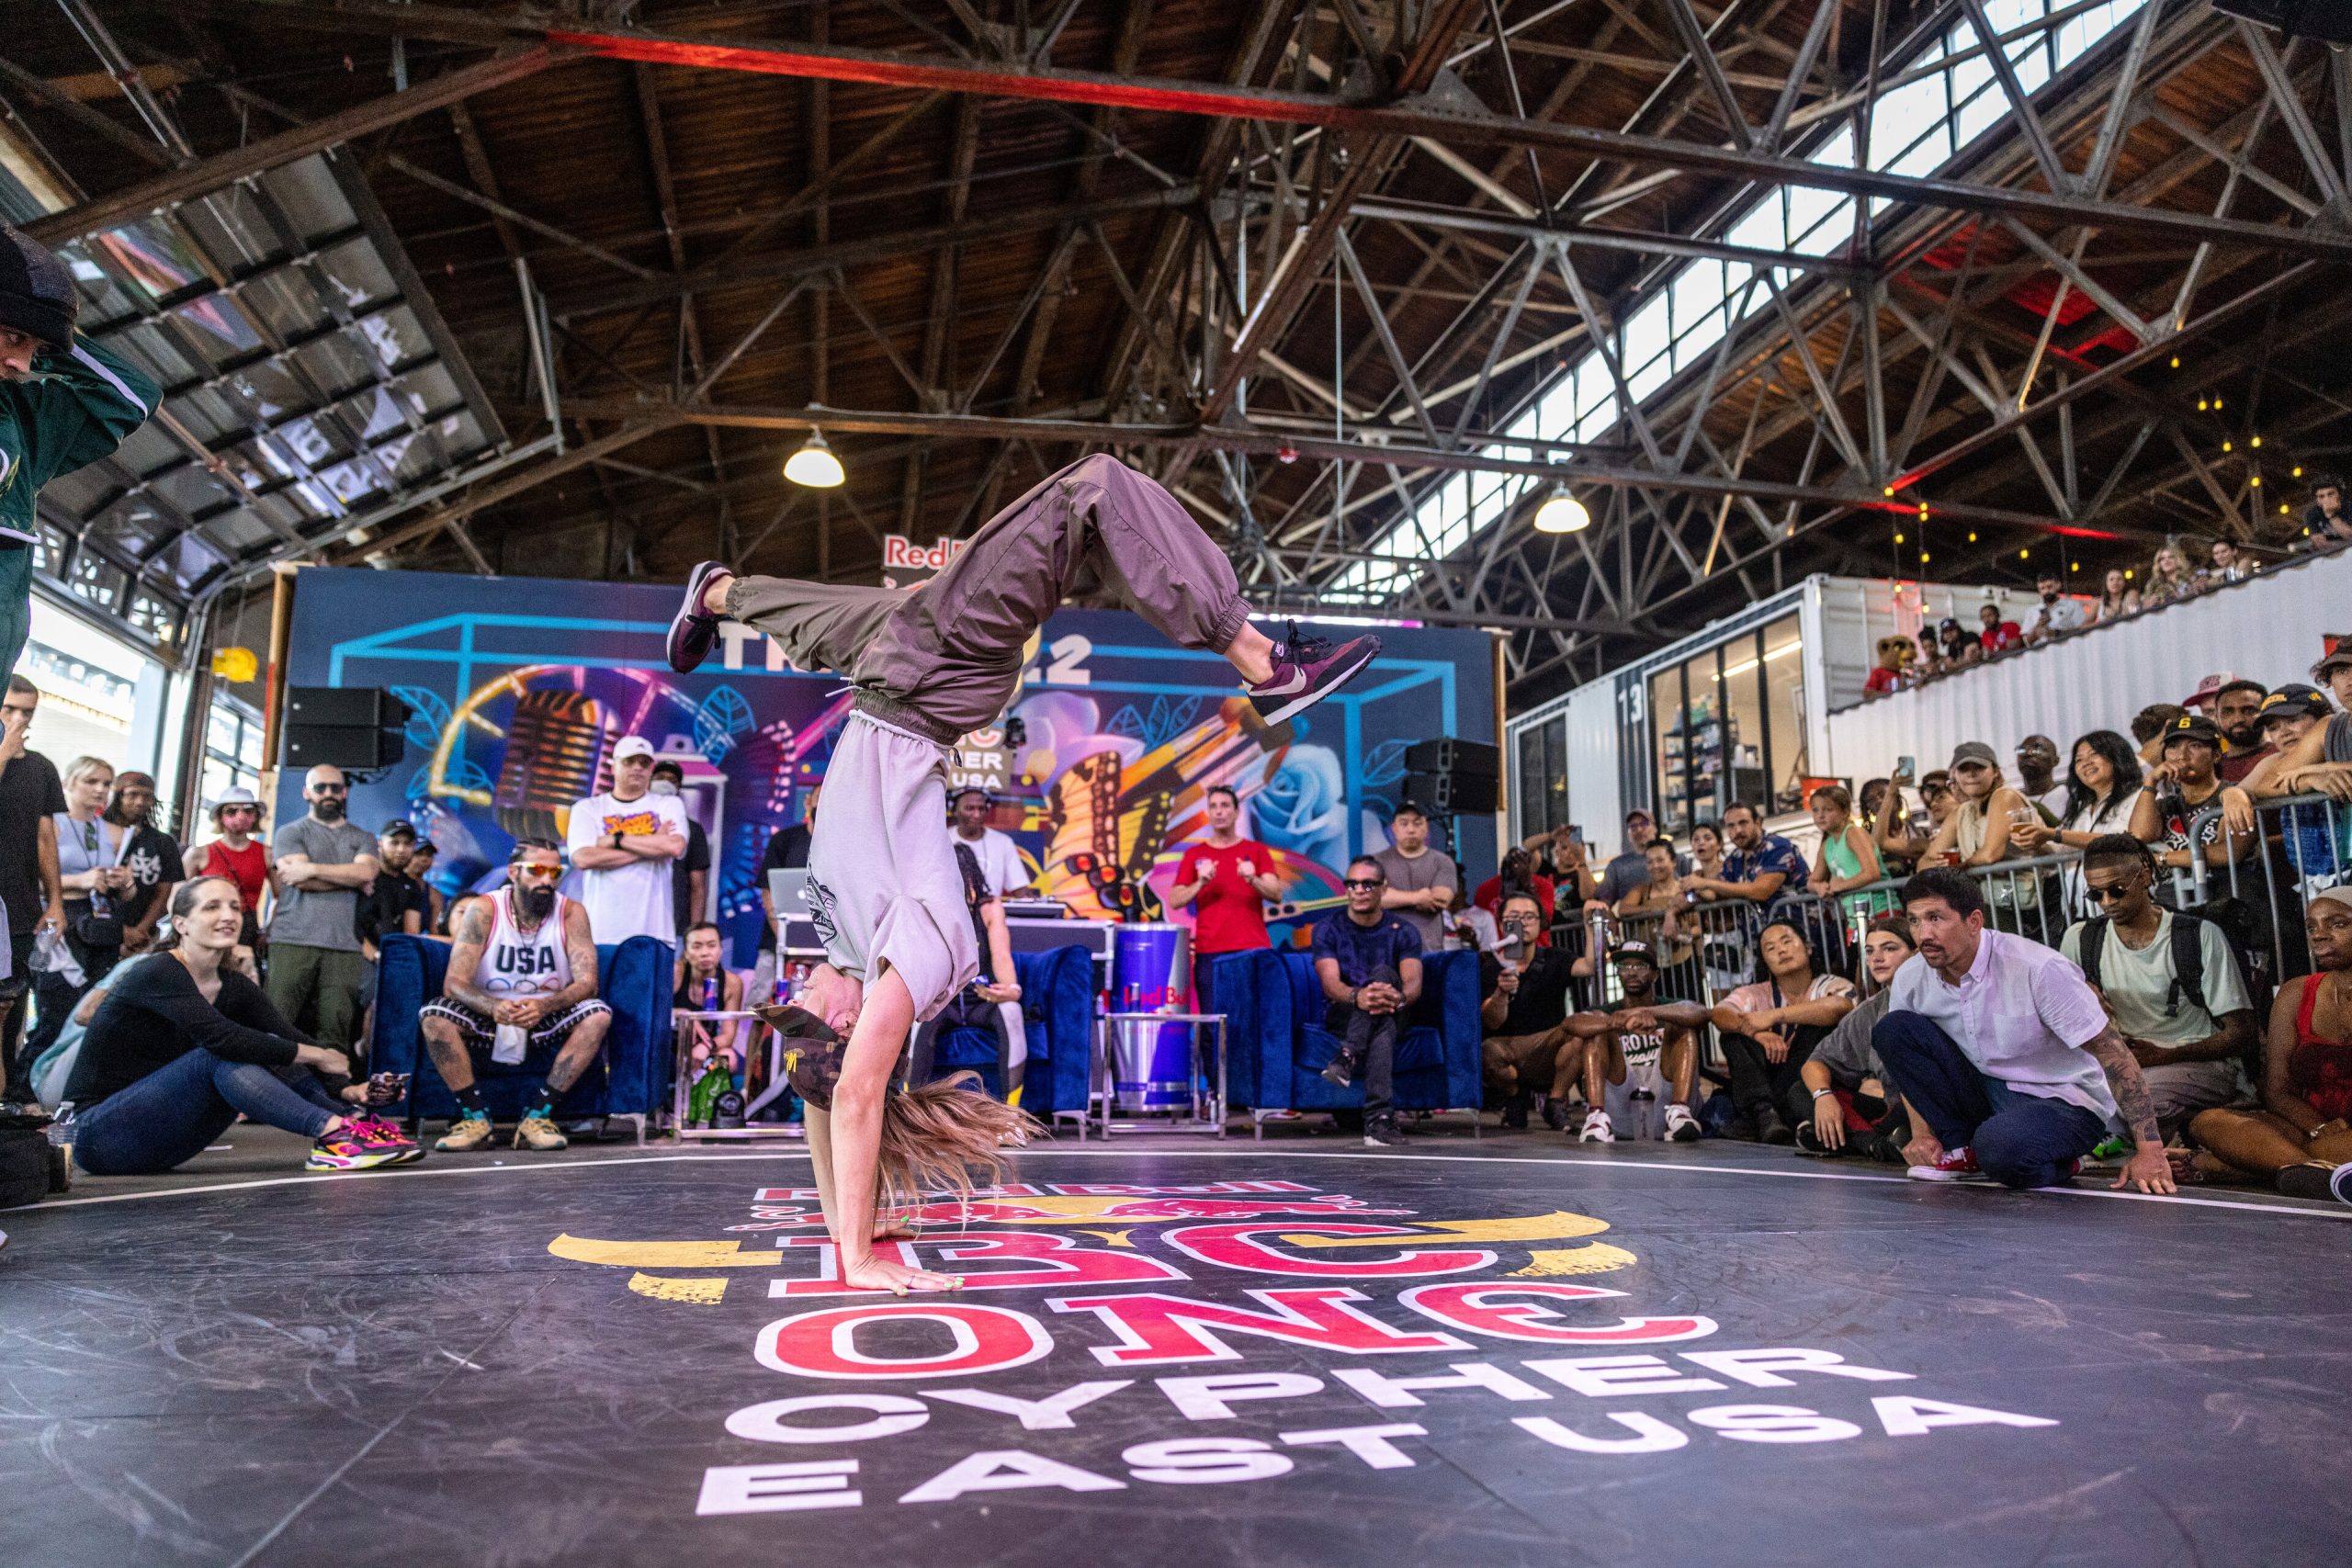 Rose competes at the BC One Cypher East USA in Philadelphia, PA, USA on 23 July 2022. // Colin Kerrigan / Red Bull Content Pool